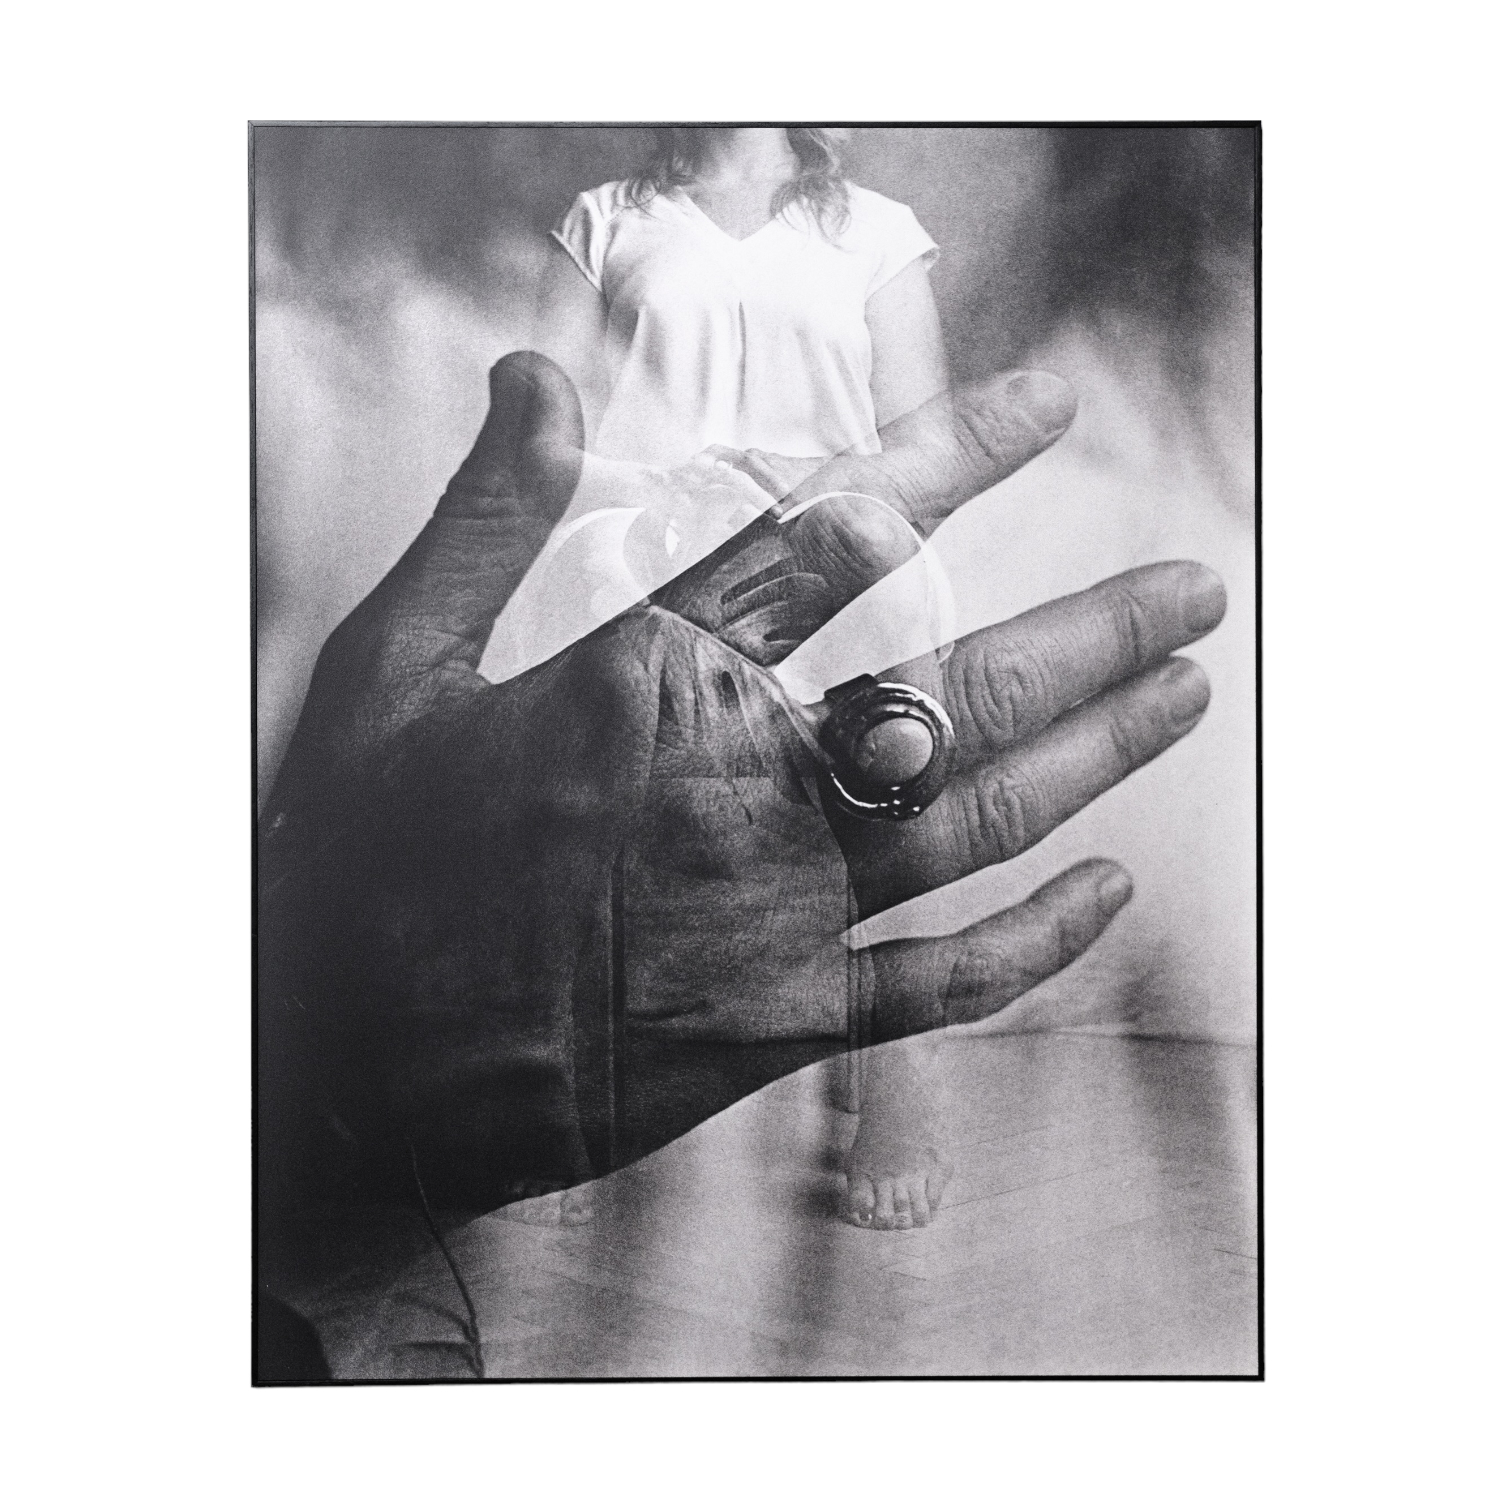 Raul Izkierdo, Hands on time, B&W photography on photographic paper, forex. Edition 1.2, 75x60 cm, 2022